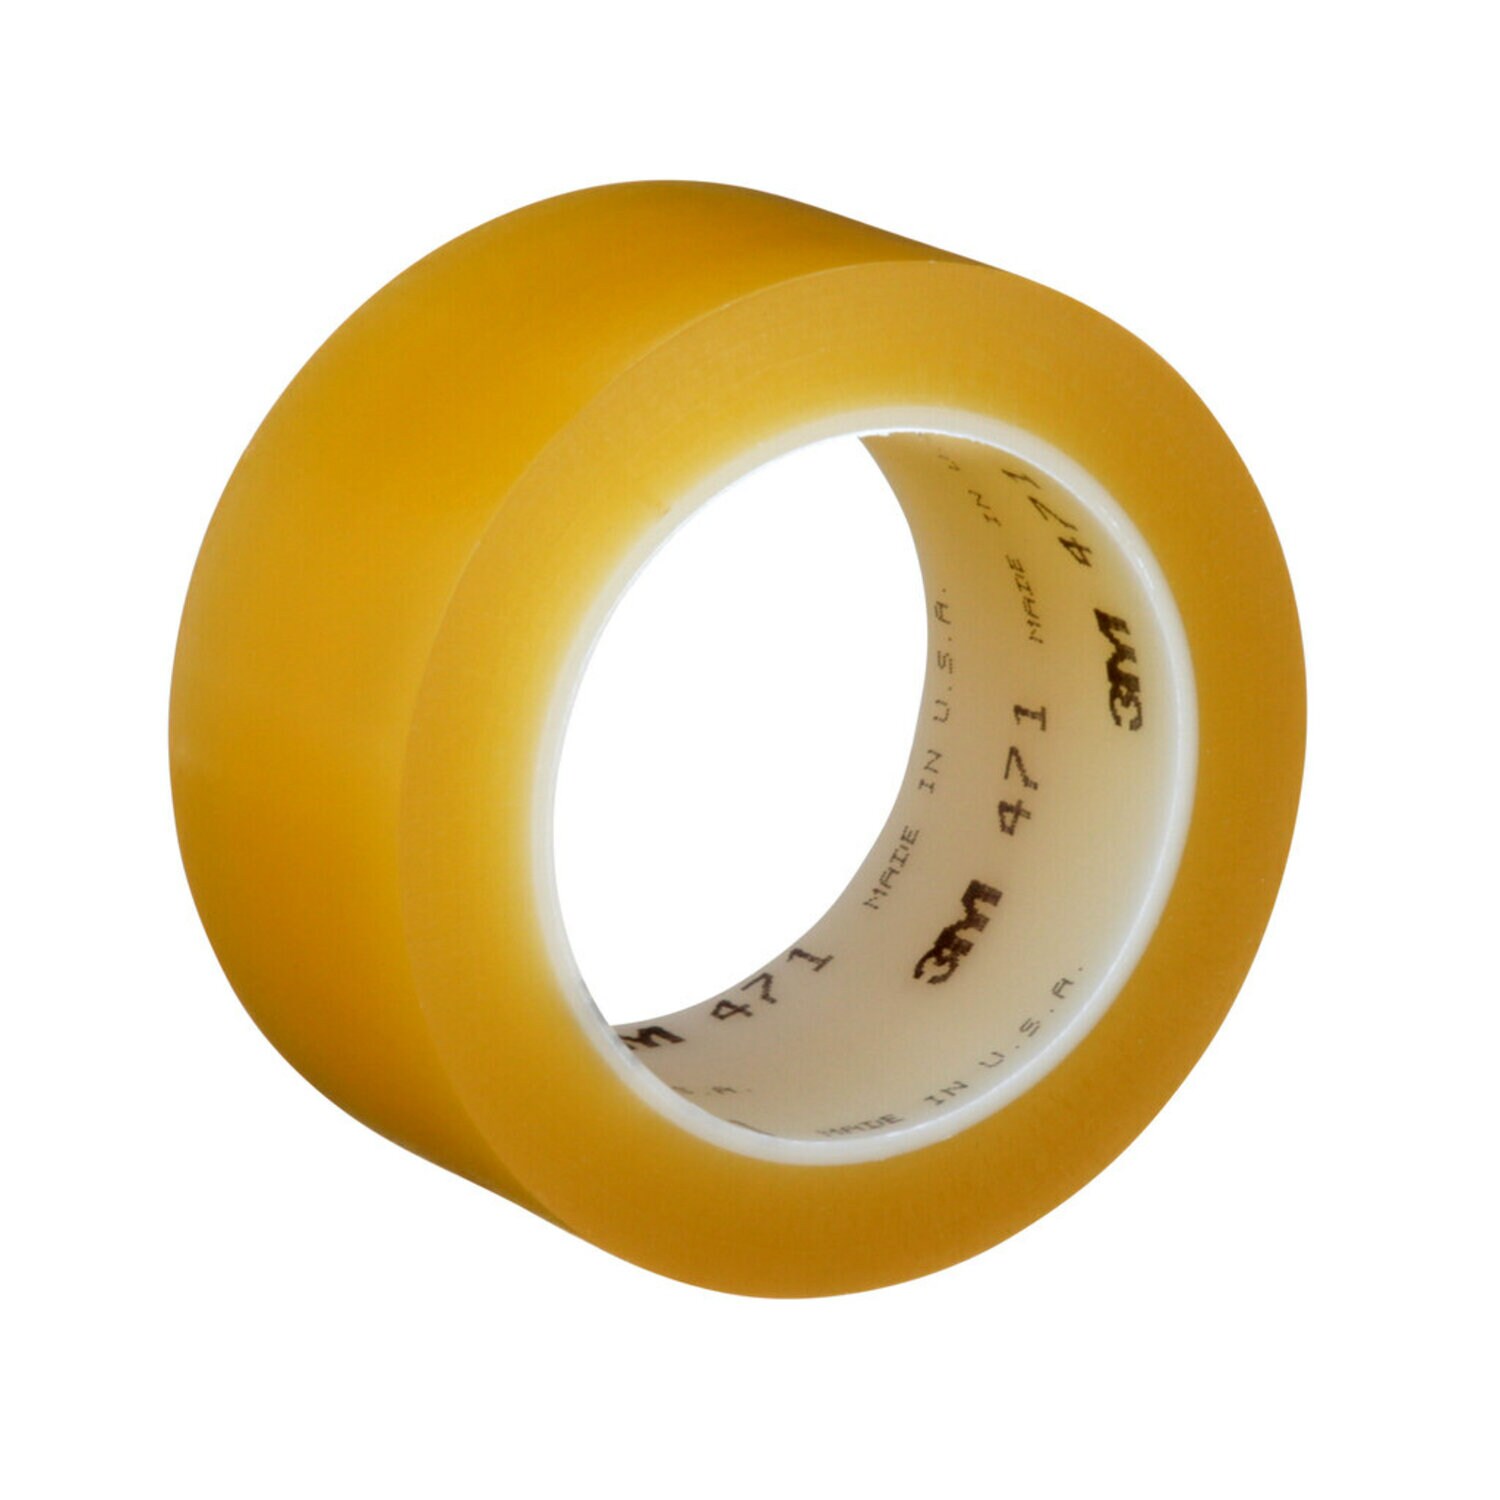 7100044331 - 3M Vinyl Tape 471, Transparent, 2 in x 36 yd, 5.2 mil, 24 rolls per
case, Individually Wrapped Conveniently Packaged